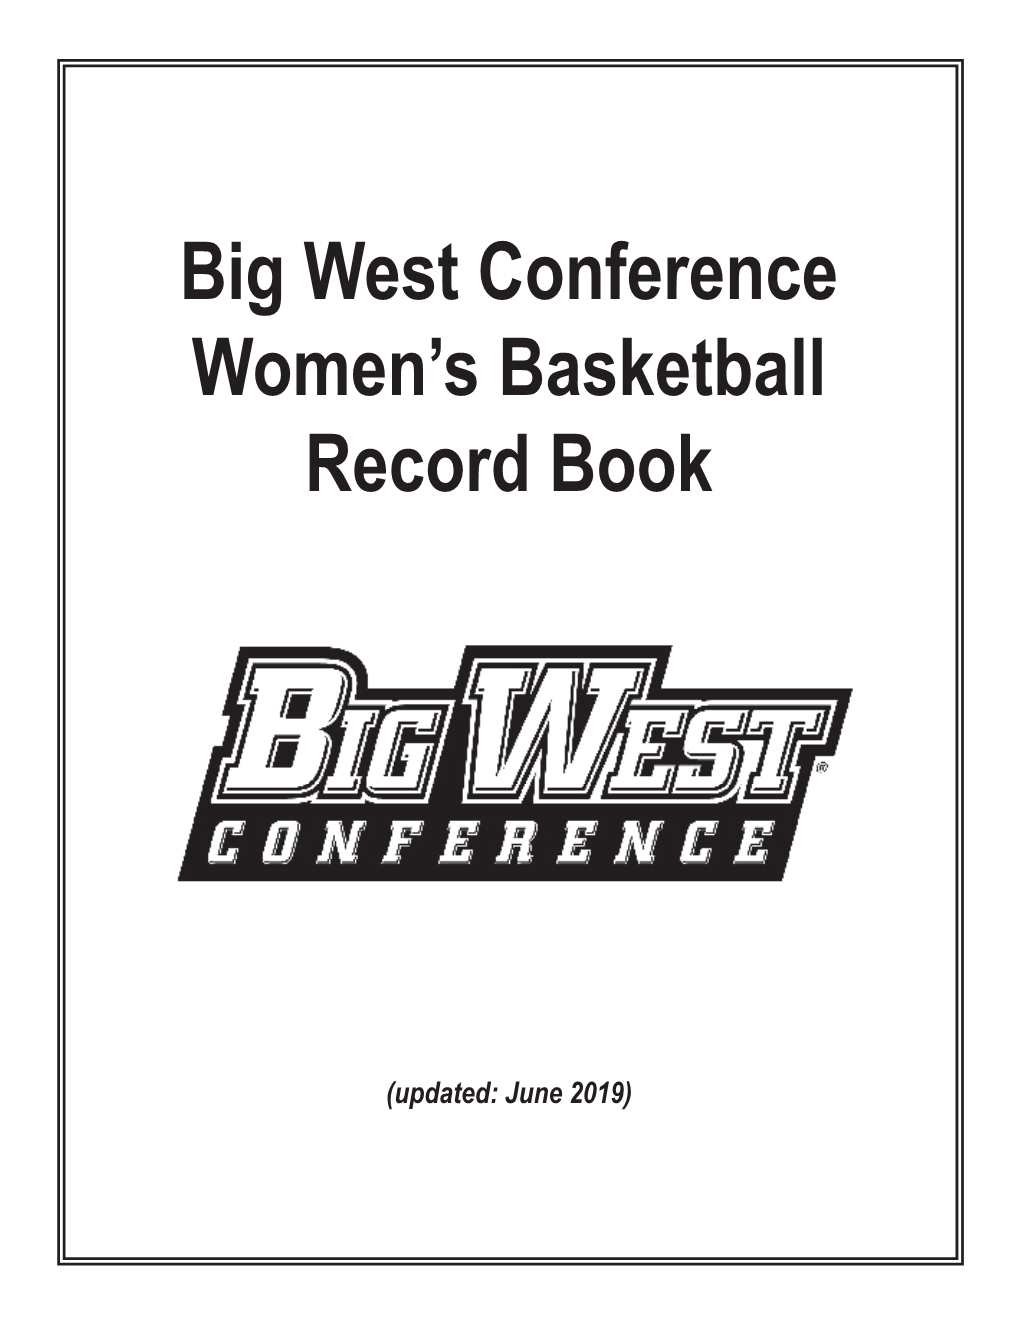 Big West Conference Women's Basketball Record Book